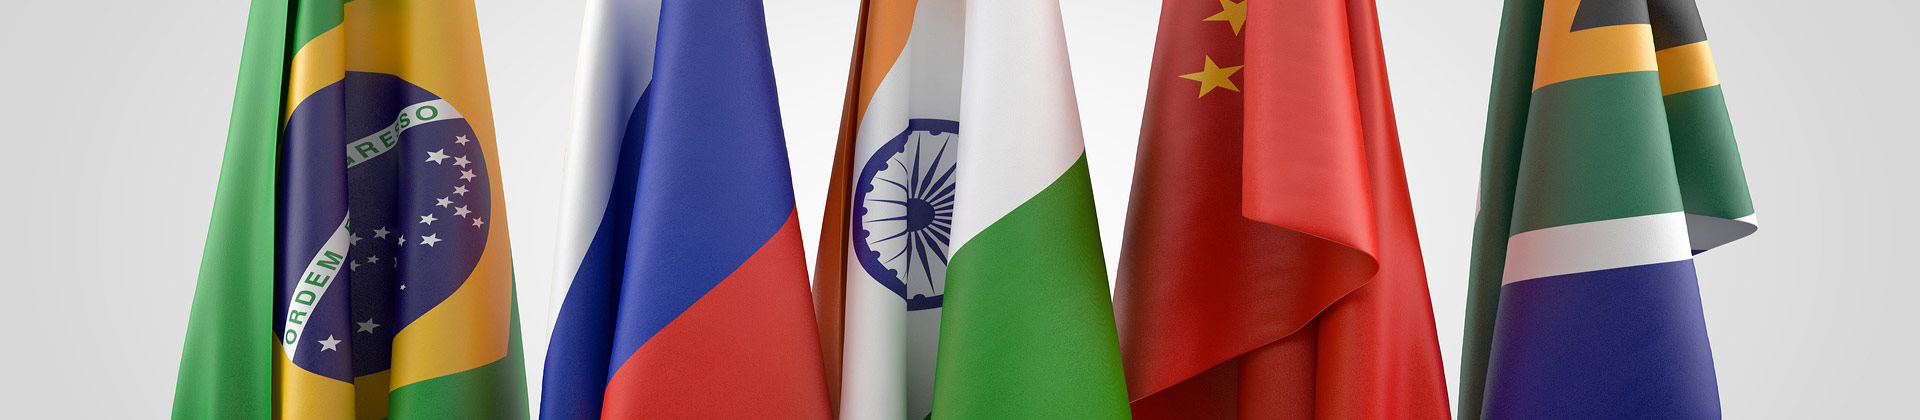 BRICS dialogue on the future of multilateralism